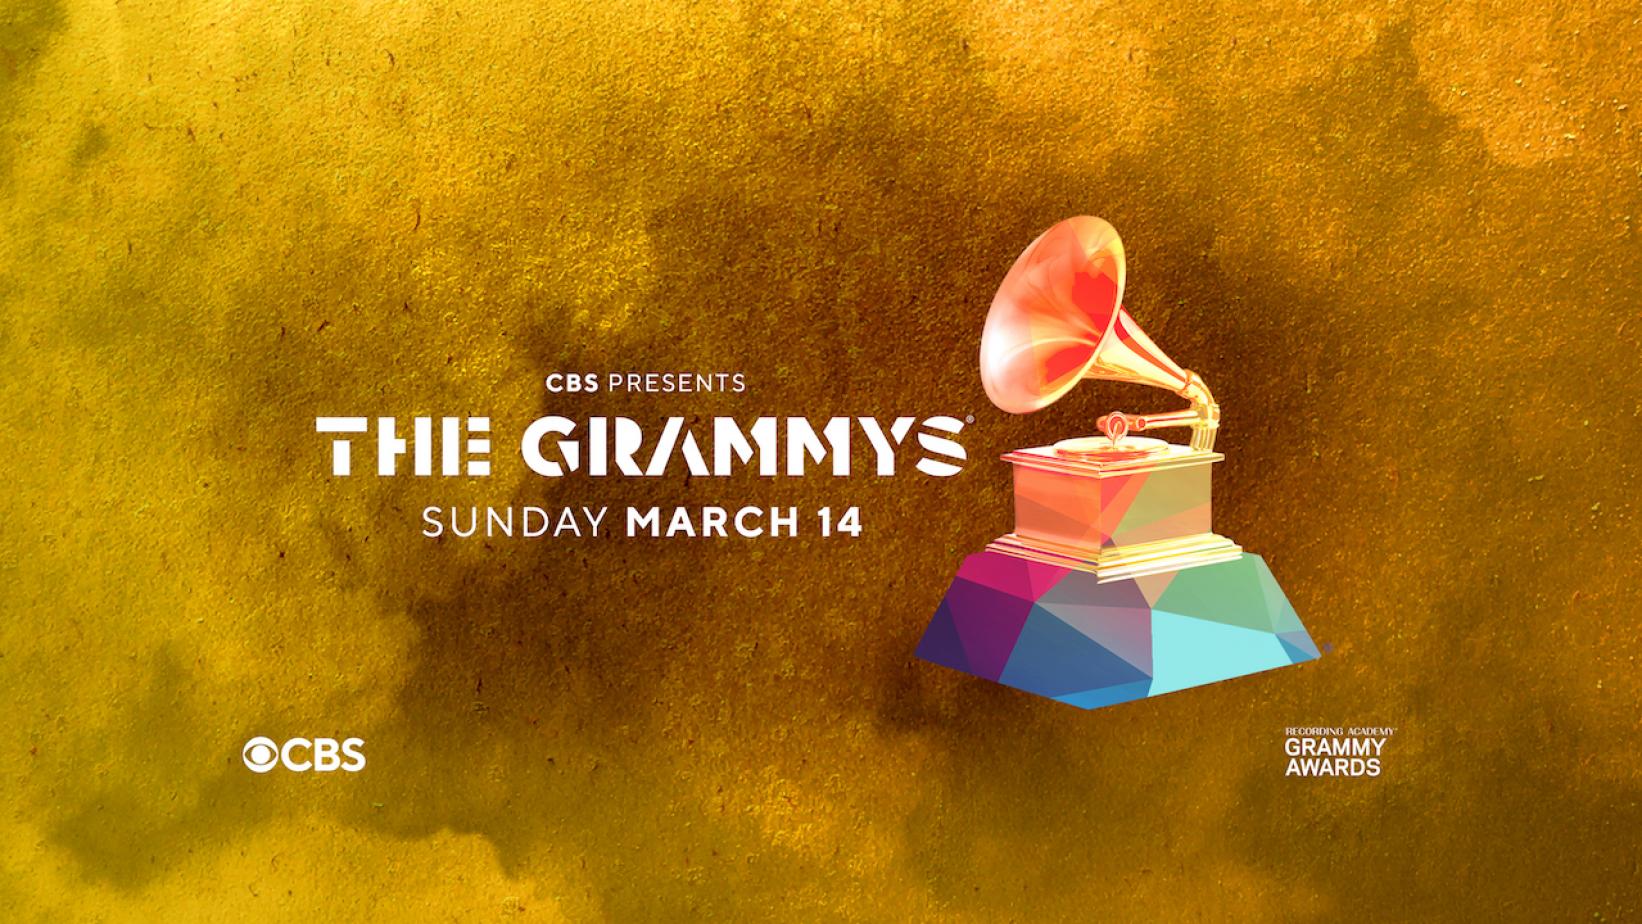 Cardi B, Megan Thee Stallion, Roddy Ricch, Lil Baby & More to Perform At 2021 GRAMMYs